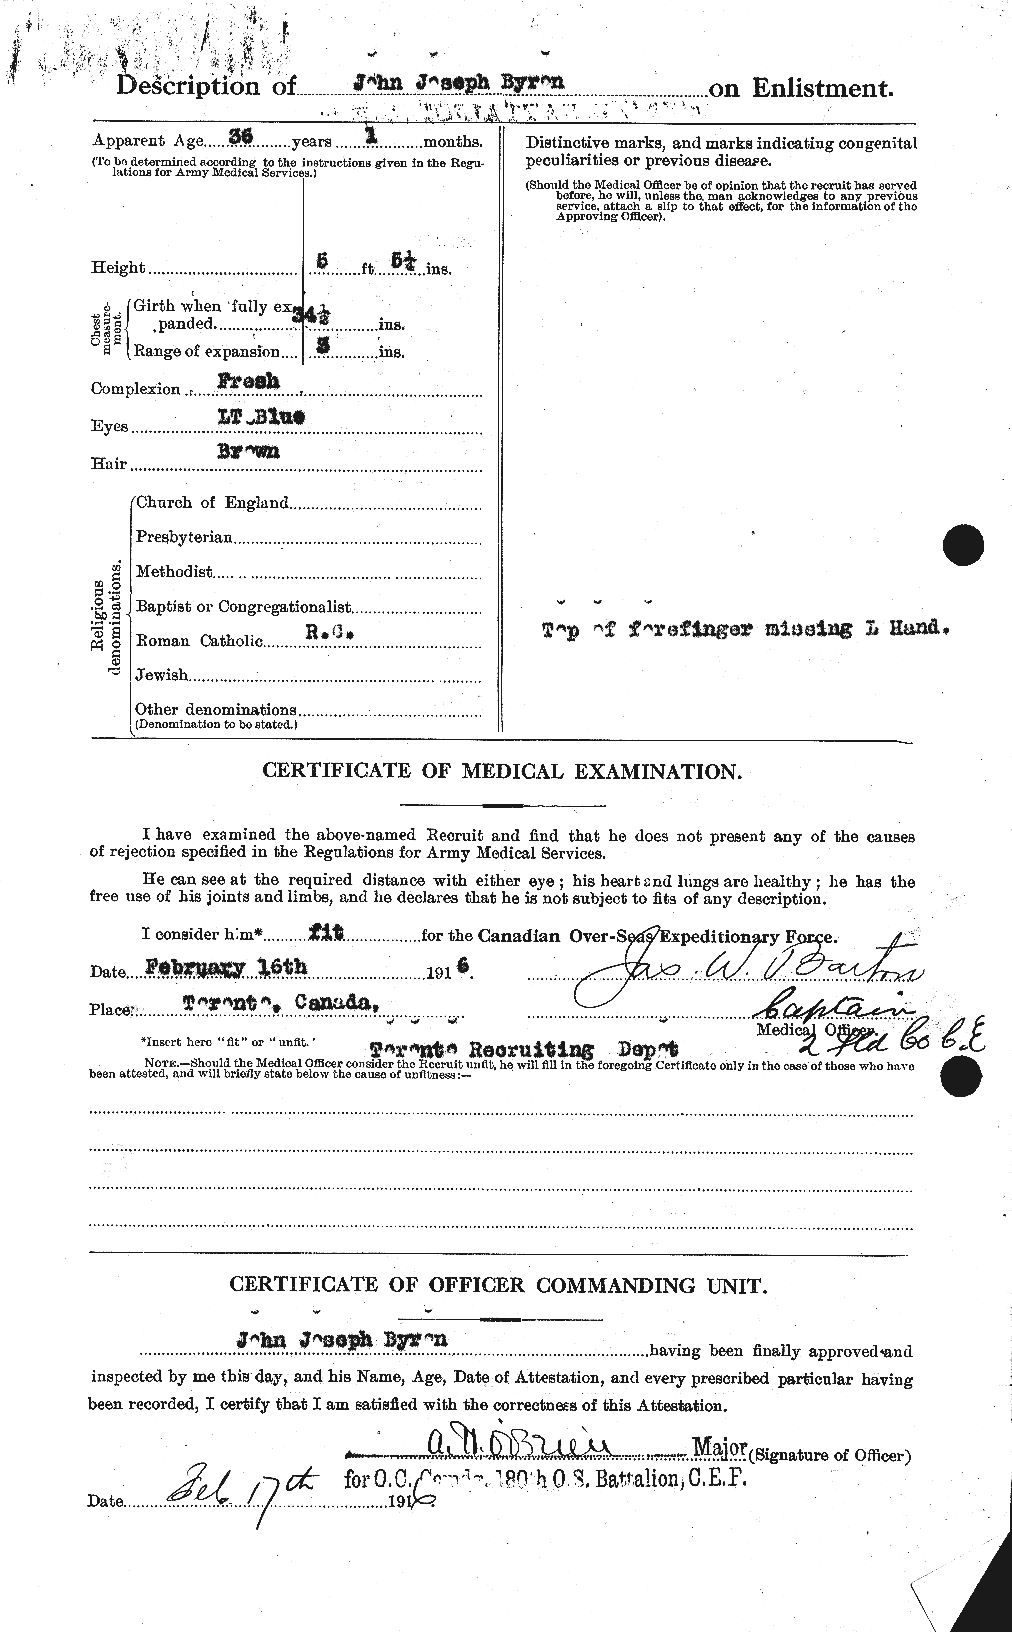 Personnel Records of the First World War - CEF 277249b